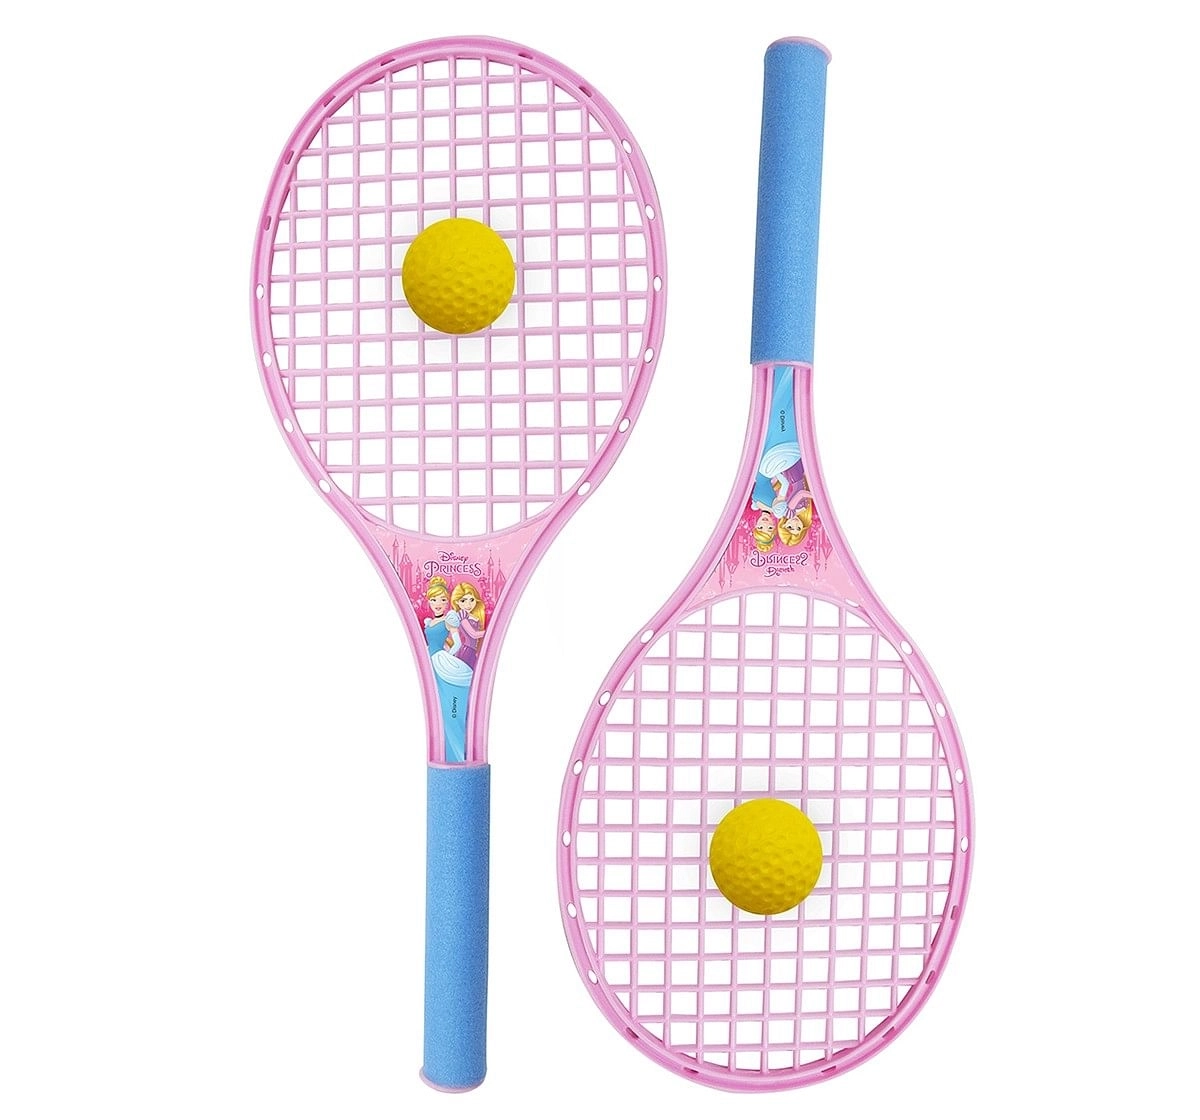 IToys Disney Princess My first Beach racket set for kids,  3Y+(Multicolour)